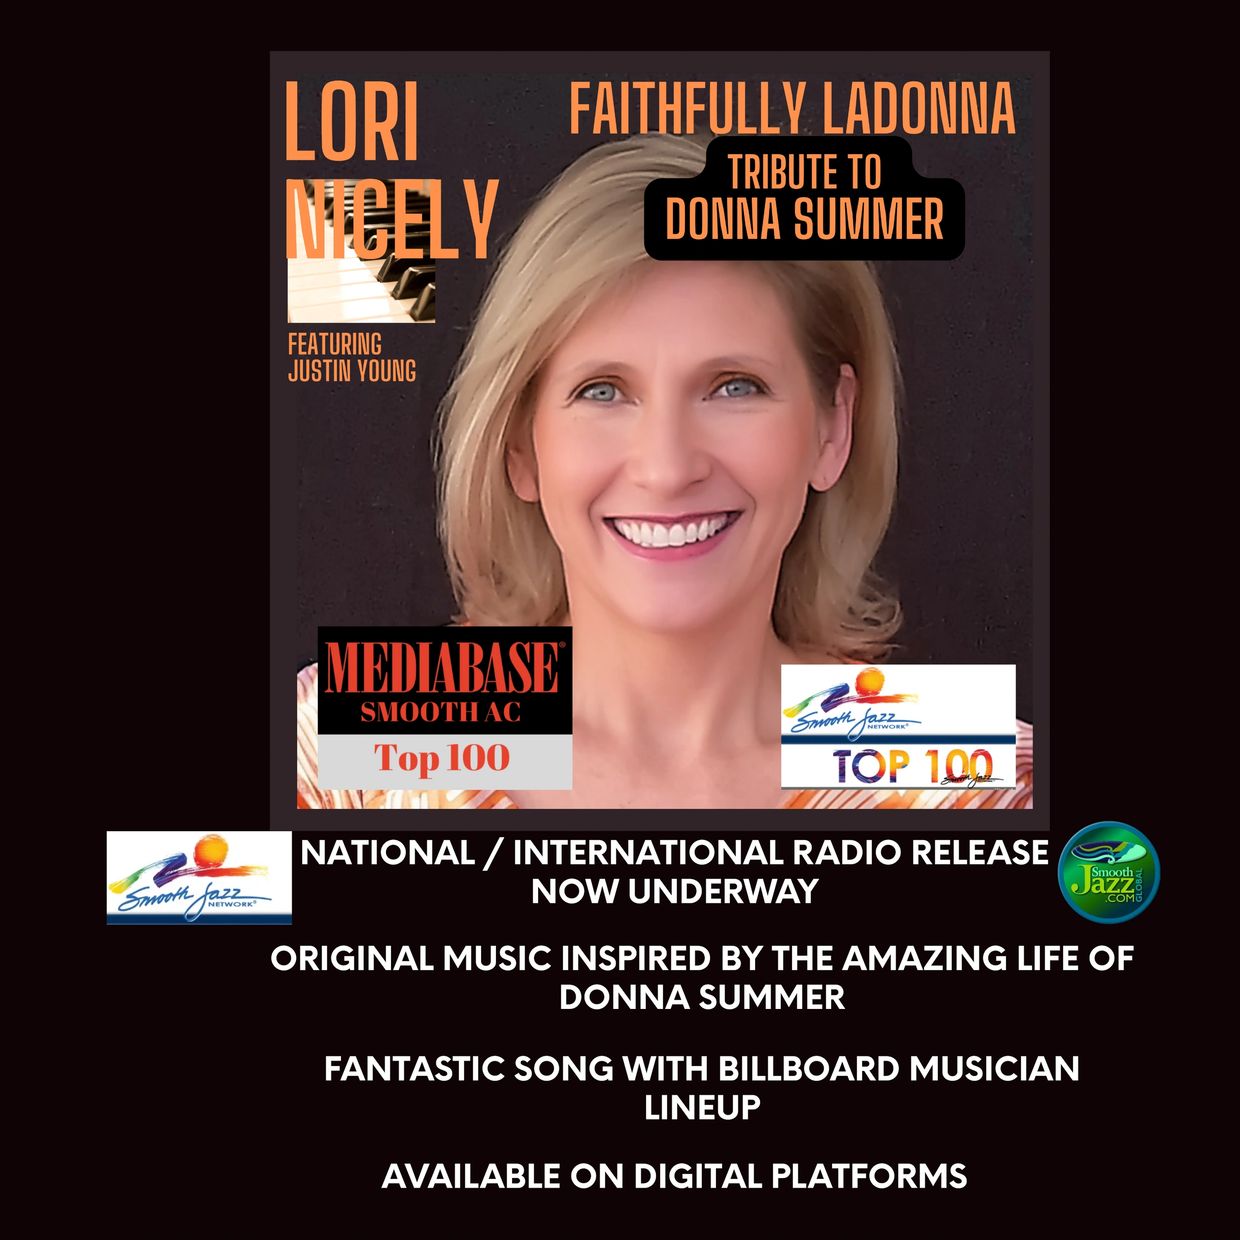 Lori Nicely album cover for "Faithfully LaDonna: Tribute to Donna Summer"